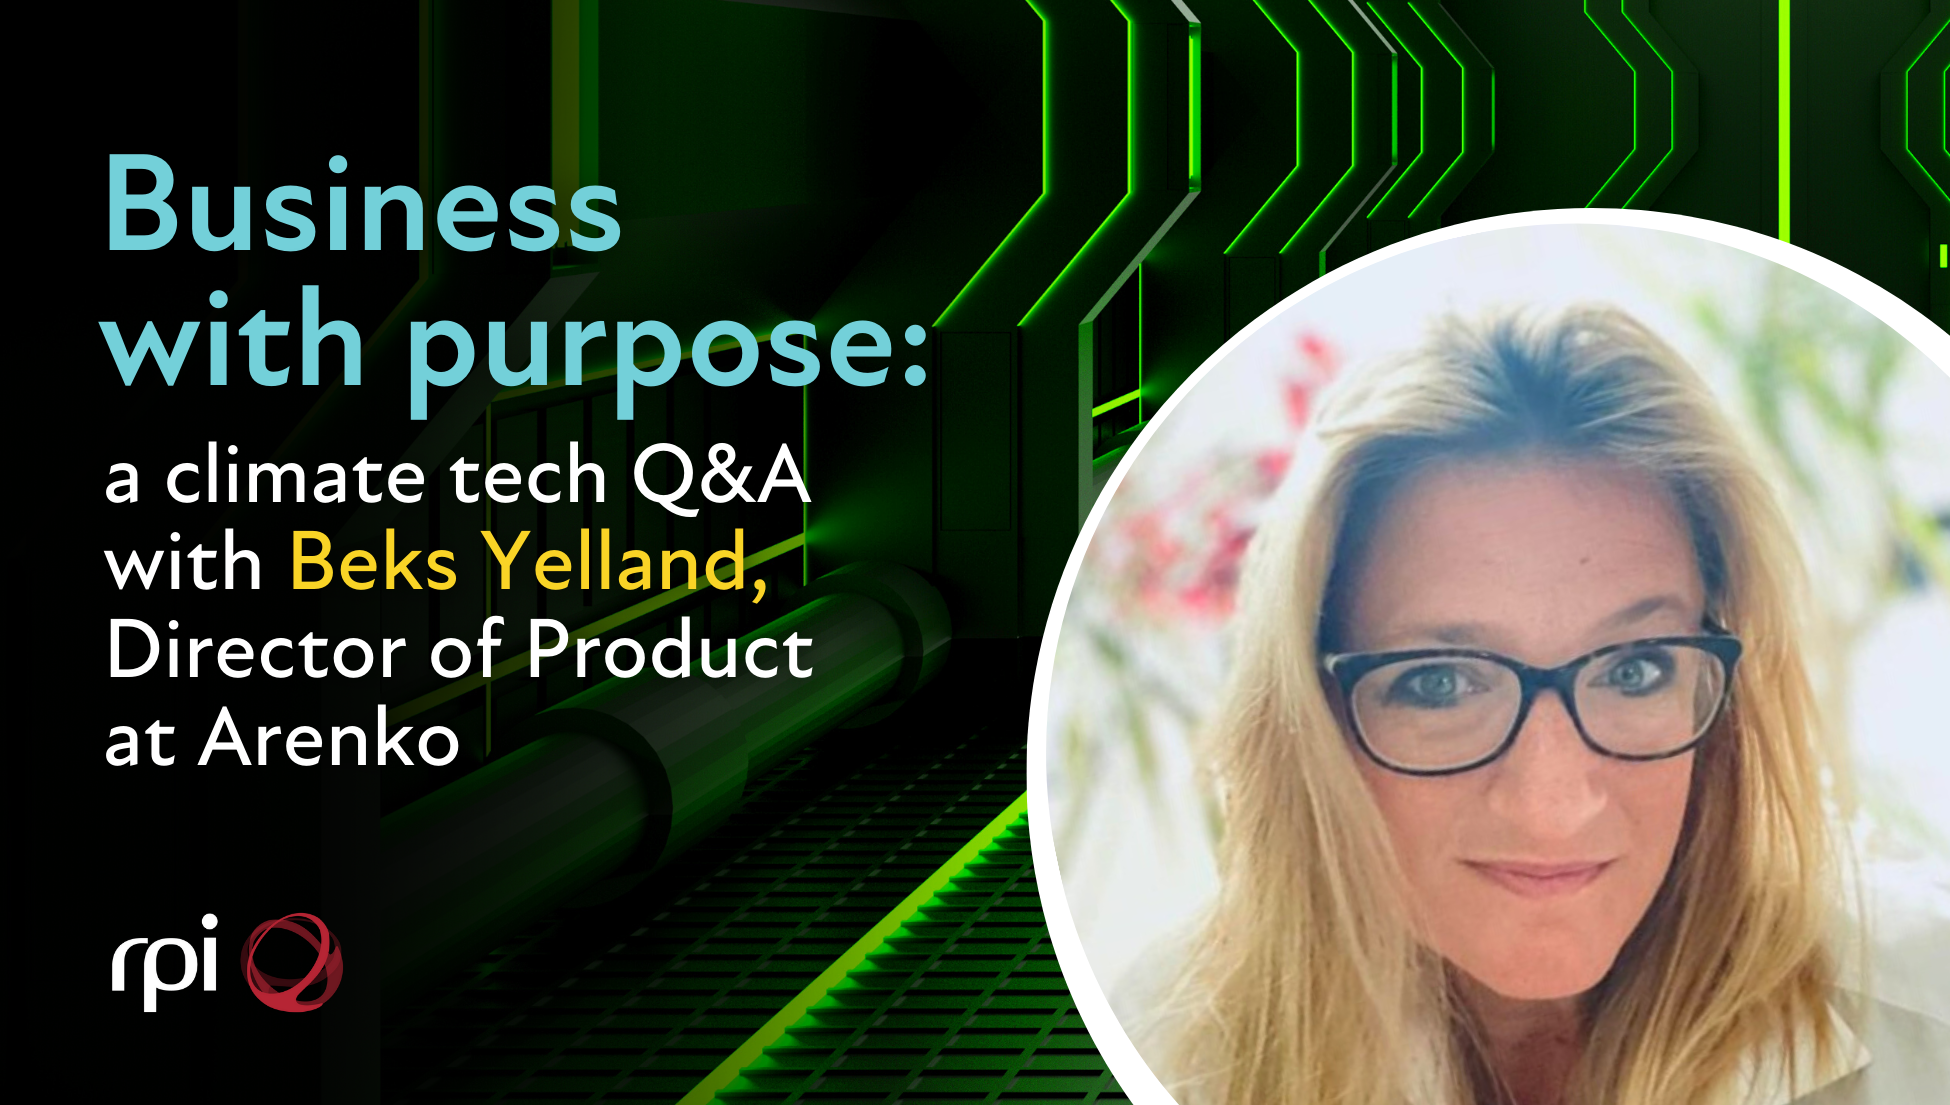 Business with purpose: a climate tech Q&A with Beks Yelland, Director of Product at Arenko 